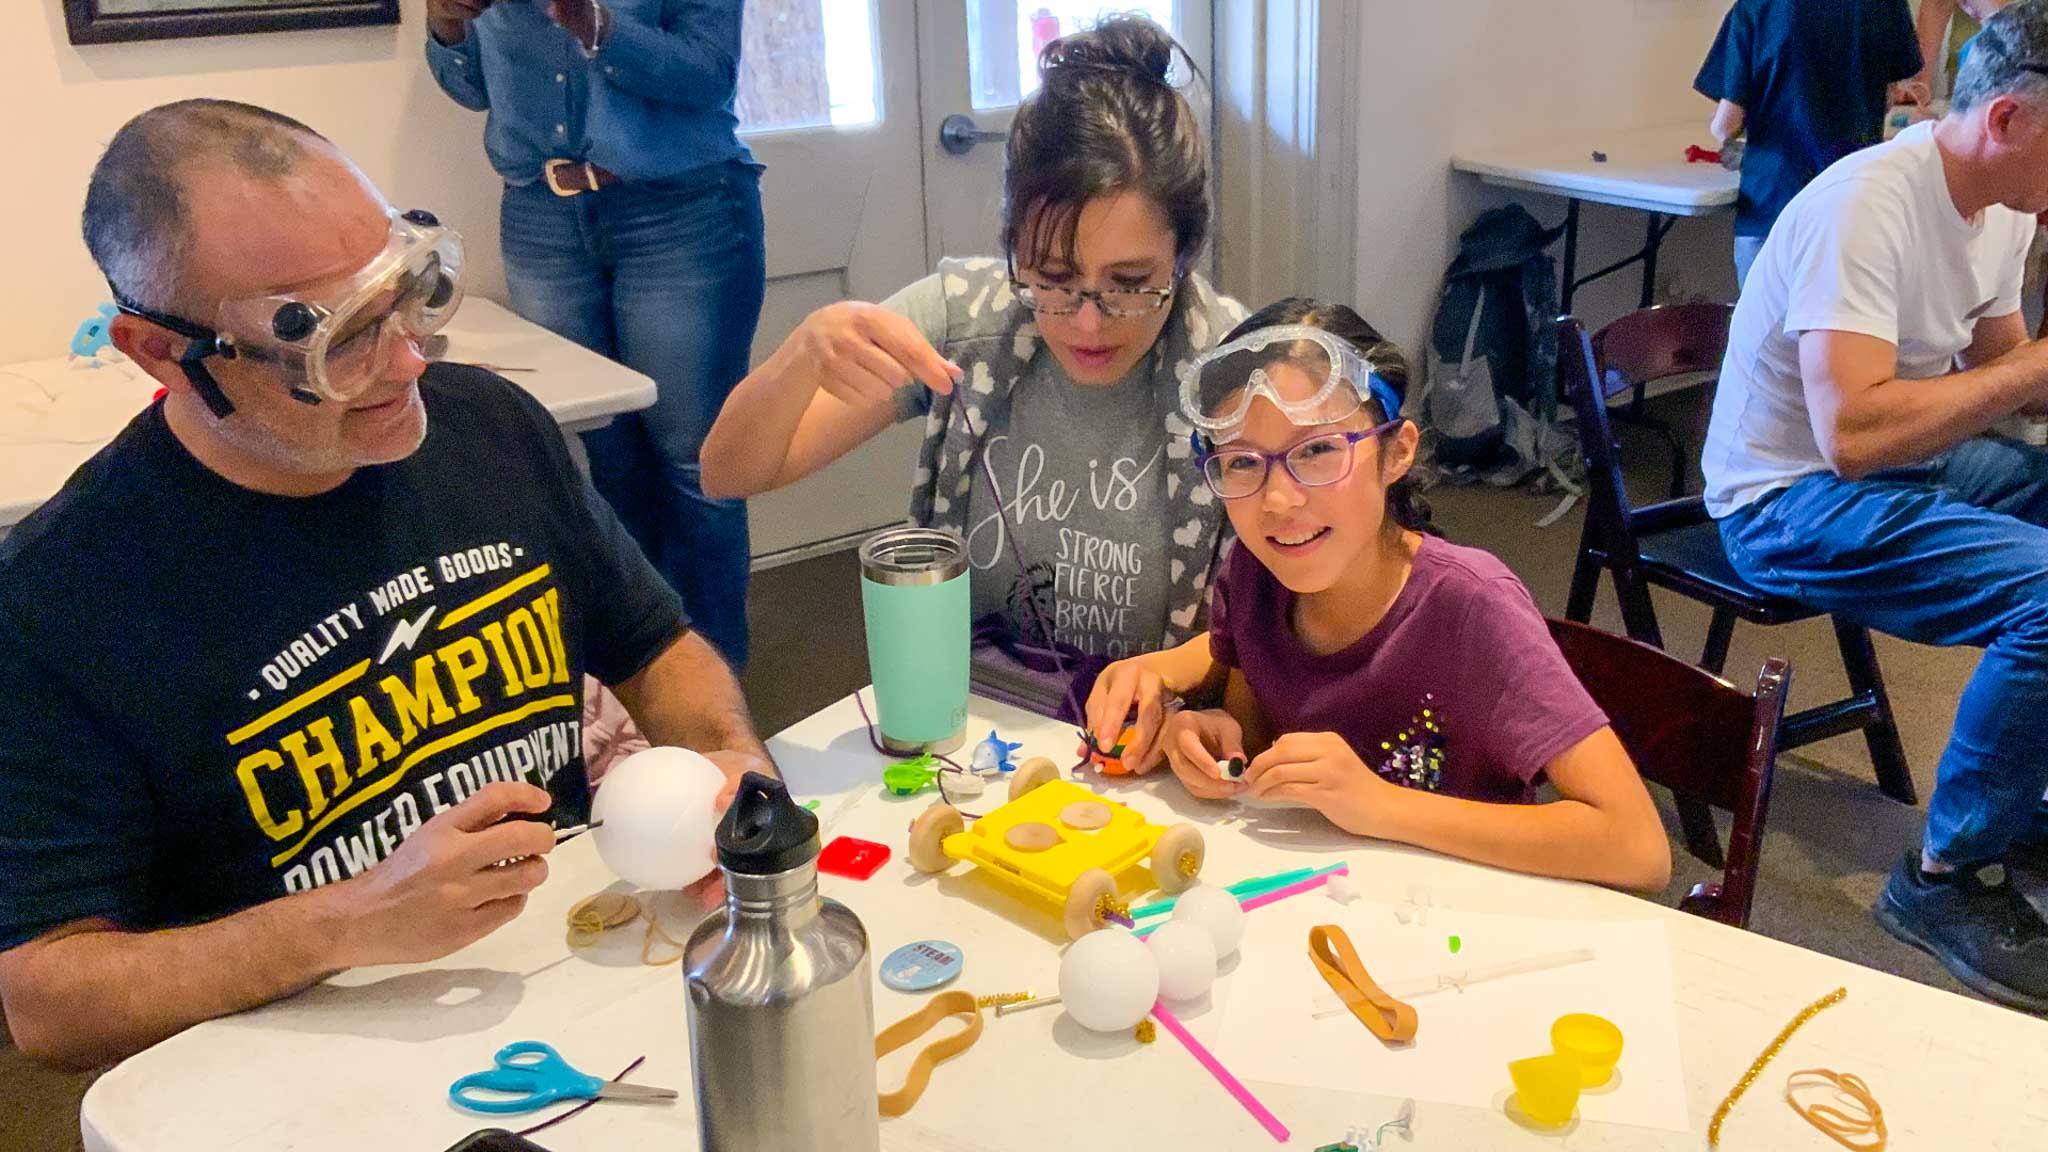 Two parents and young girl wearing goggles, smiling and sitting at a table covered in craft materials.